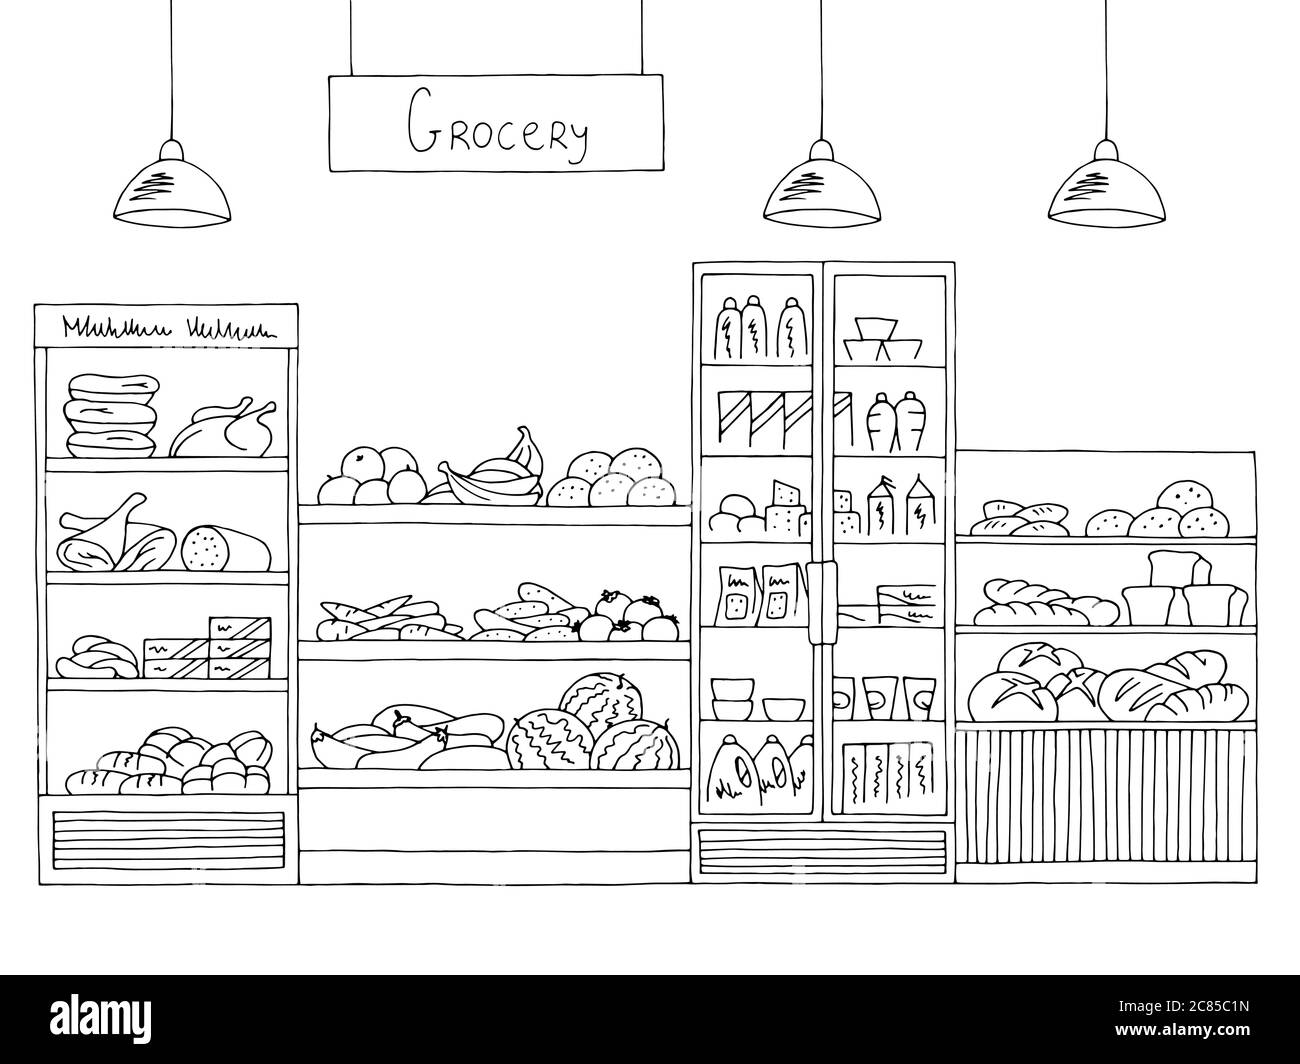 Grocery store shop interior black white graphic sketch illustration vector  Stock Vector Image & Art - Alamy